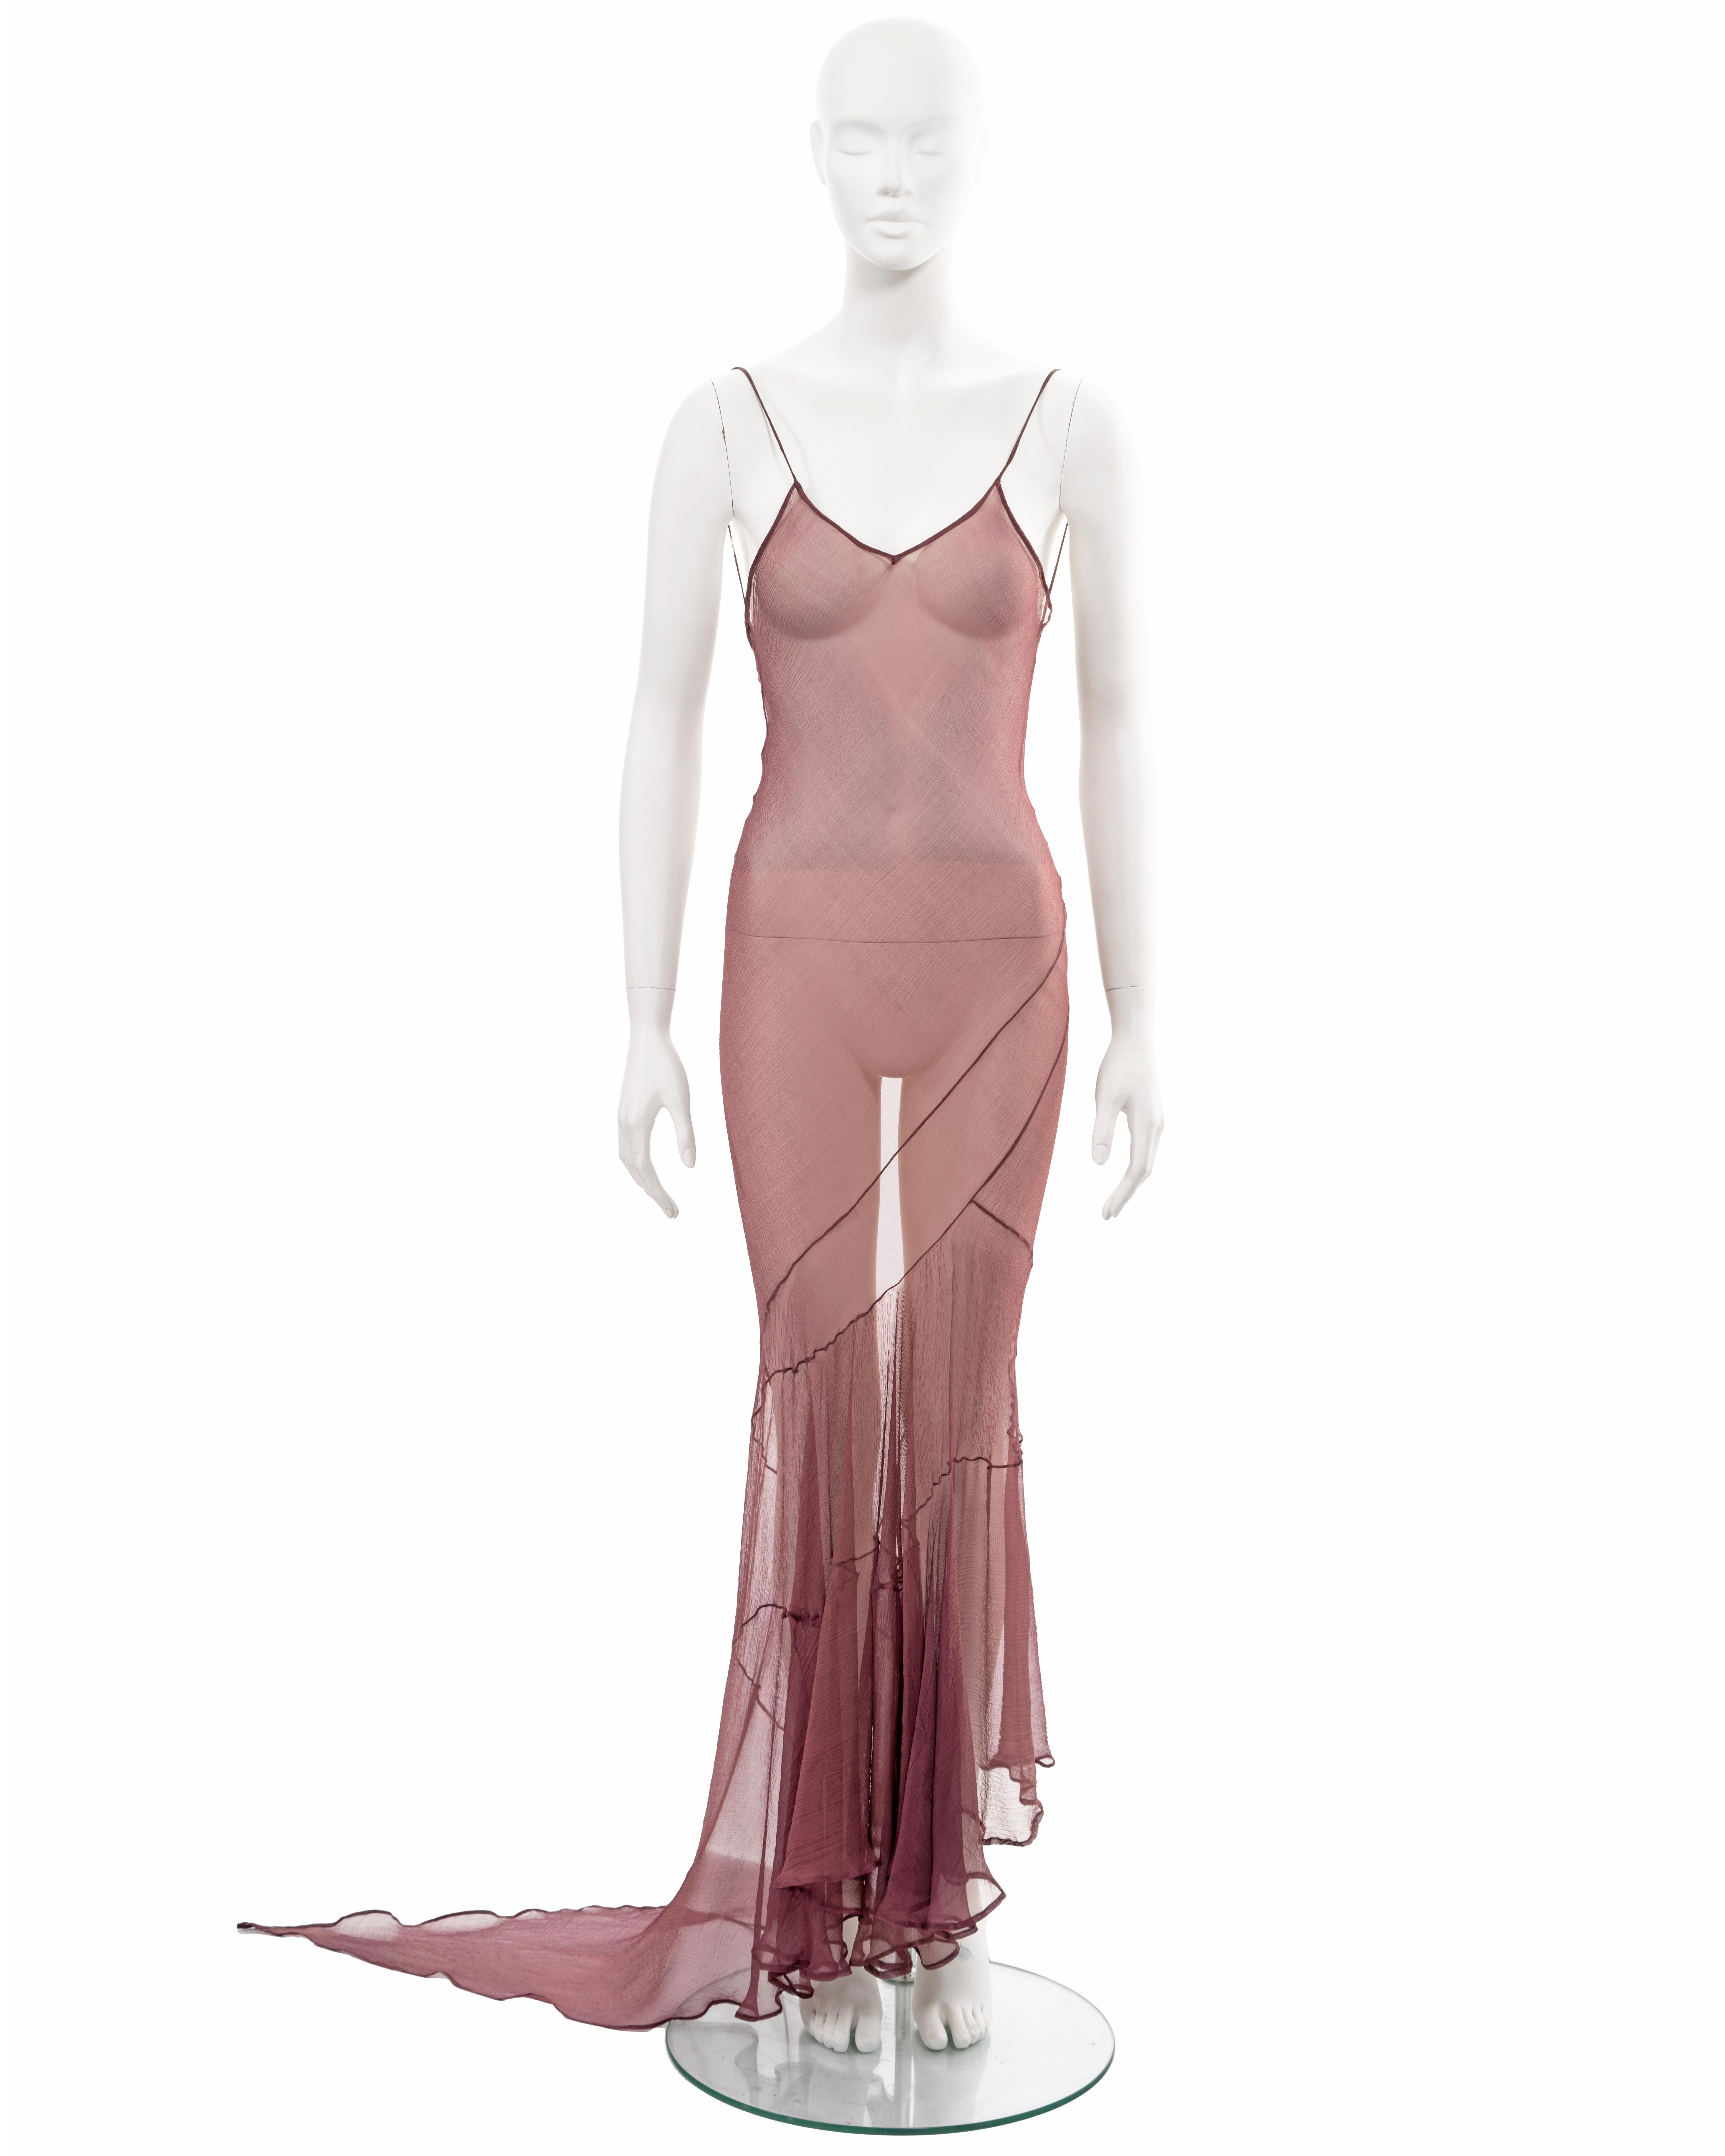 ▪ John Galliano evening slip dress
▪ Sold by One of a Kind Archive
▪ 'Filibusters', Spring-Summer 1993
▪ Museum Grade
▪ Constructed from maroon bias-cut silk chiffon 
▪ Descending hemline with pointed train 
▪ Spaghetti straps 
▪ Two string ties